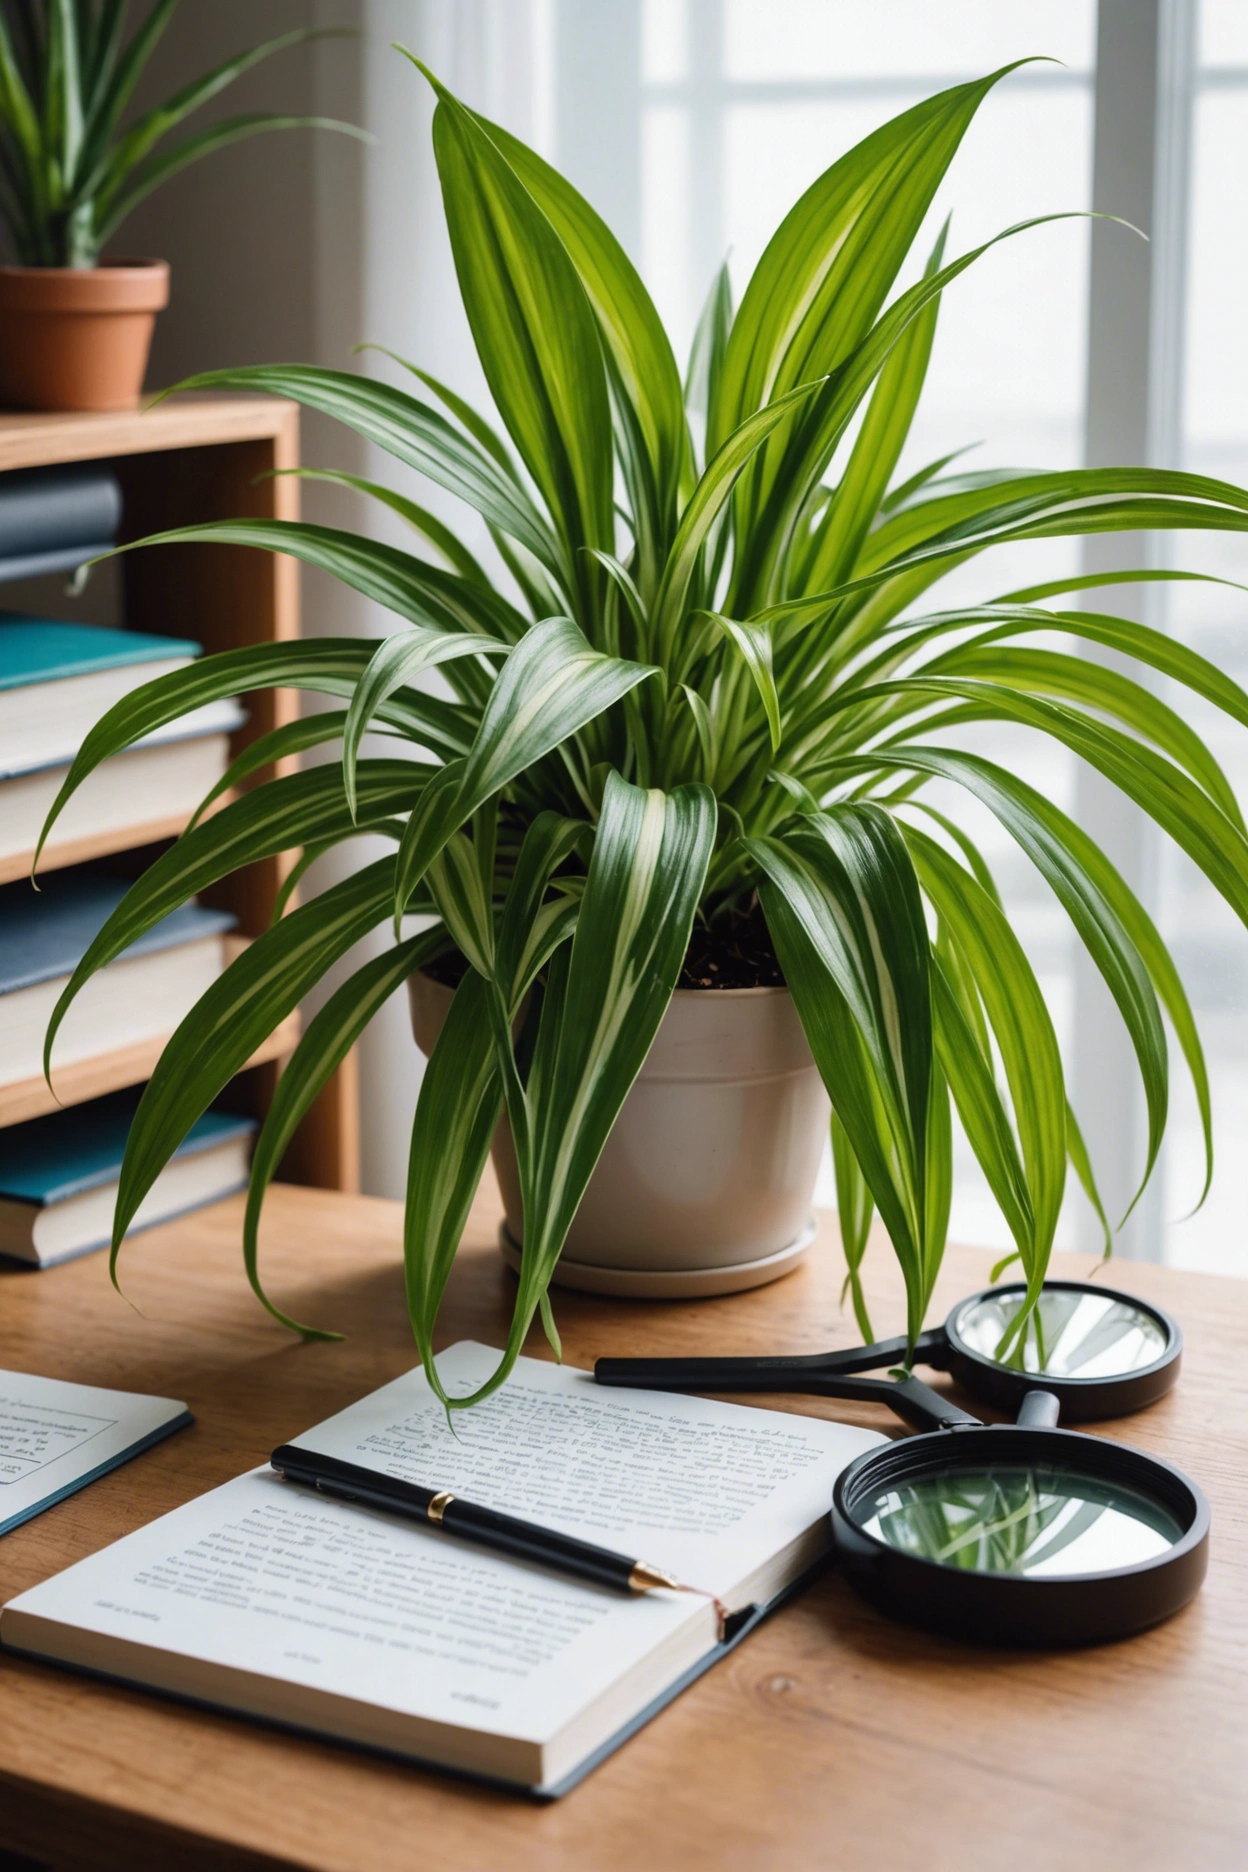 "A spider plant with browning leaves next to a magnifying glass and a plant care guidebook in a bright indoor setting."